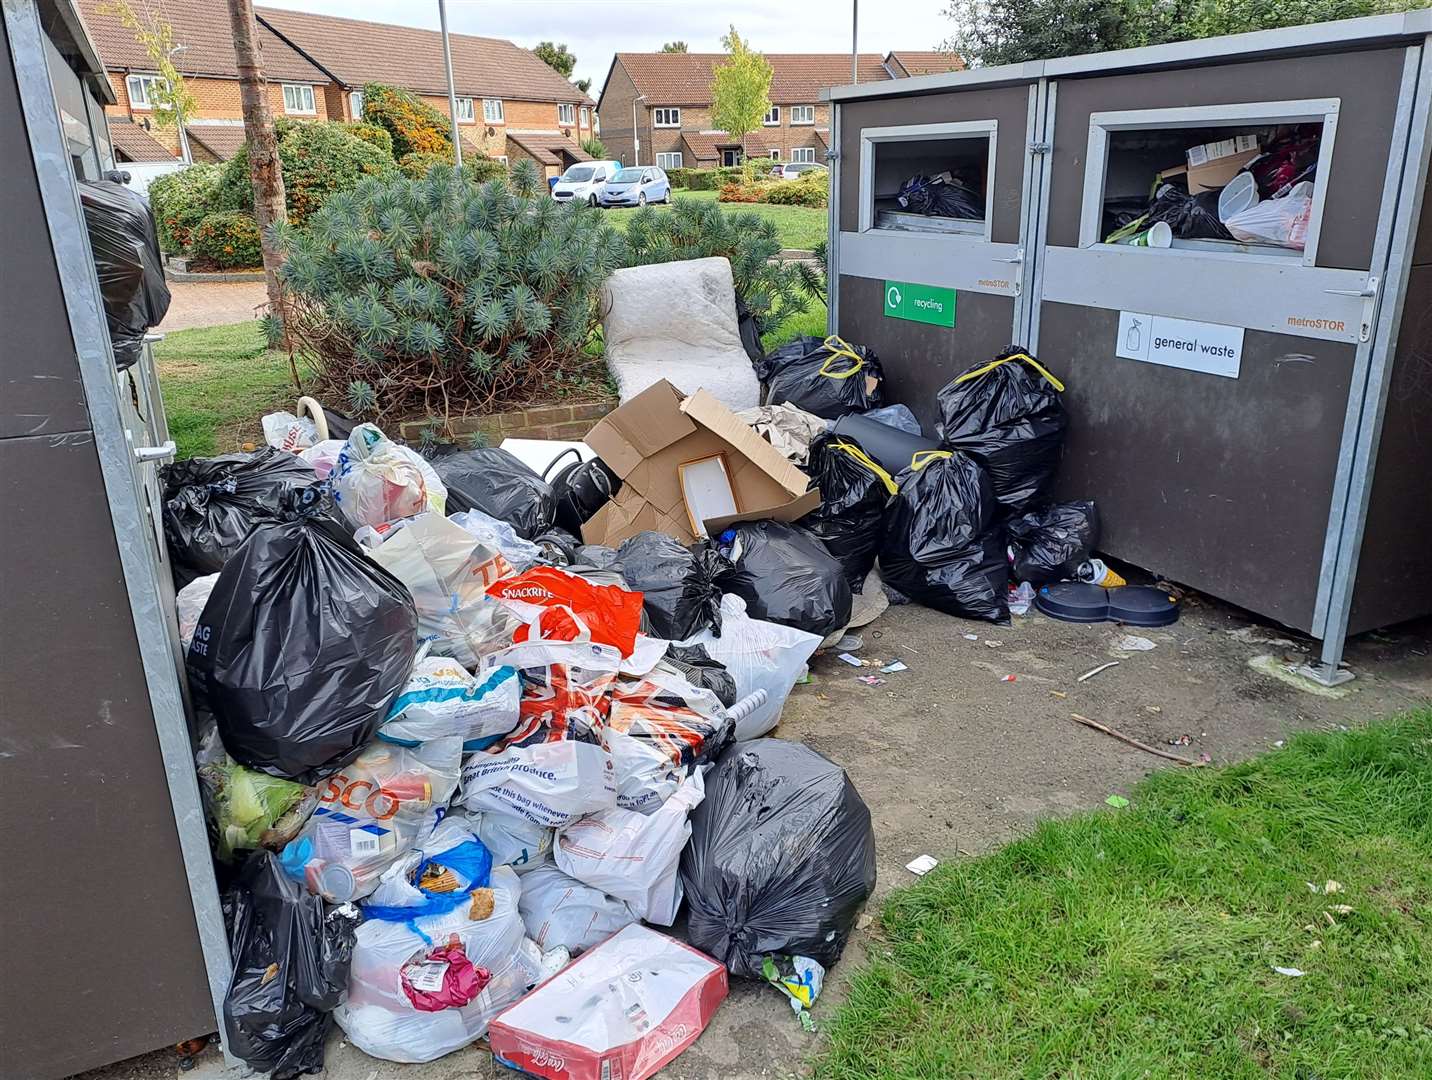 The rubbish outside Deham House, Cavell Way, includes bin bags, mattresses and cardboard boxes